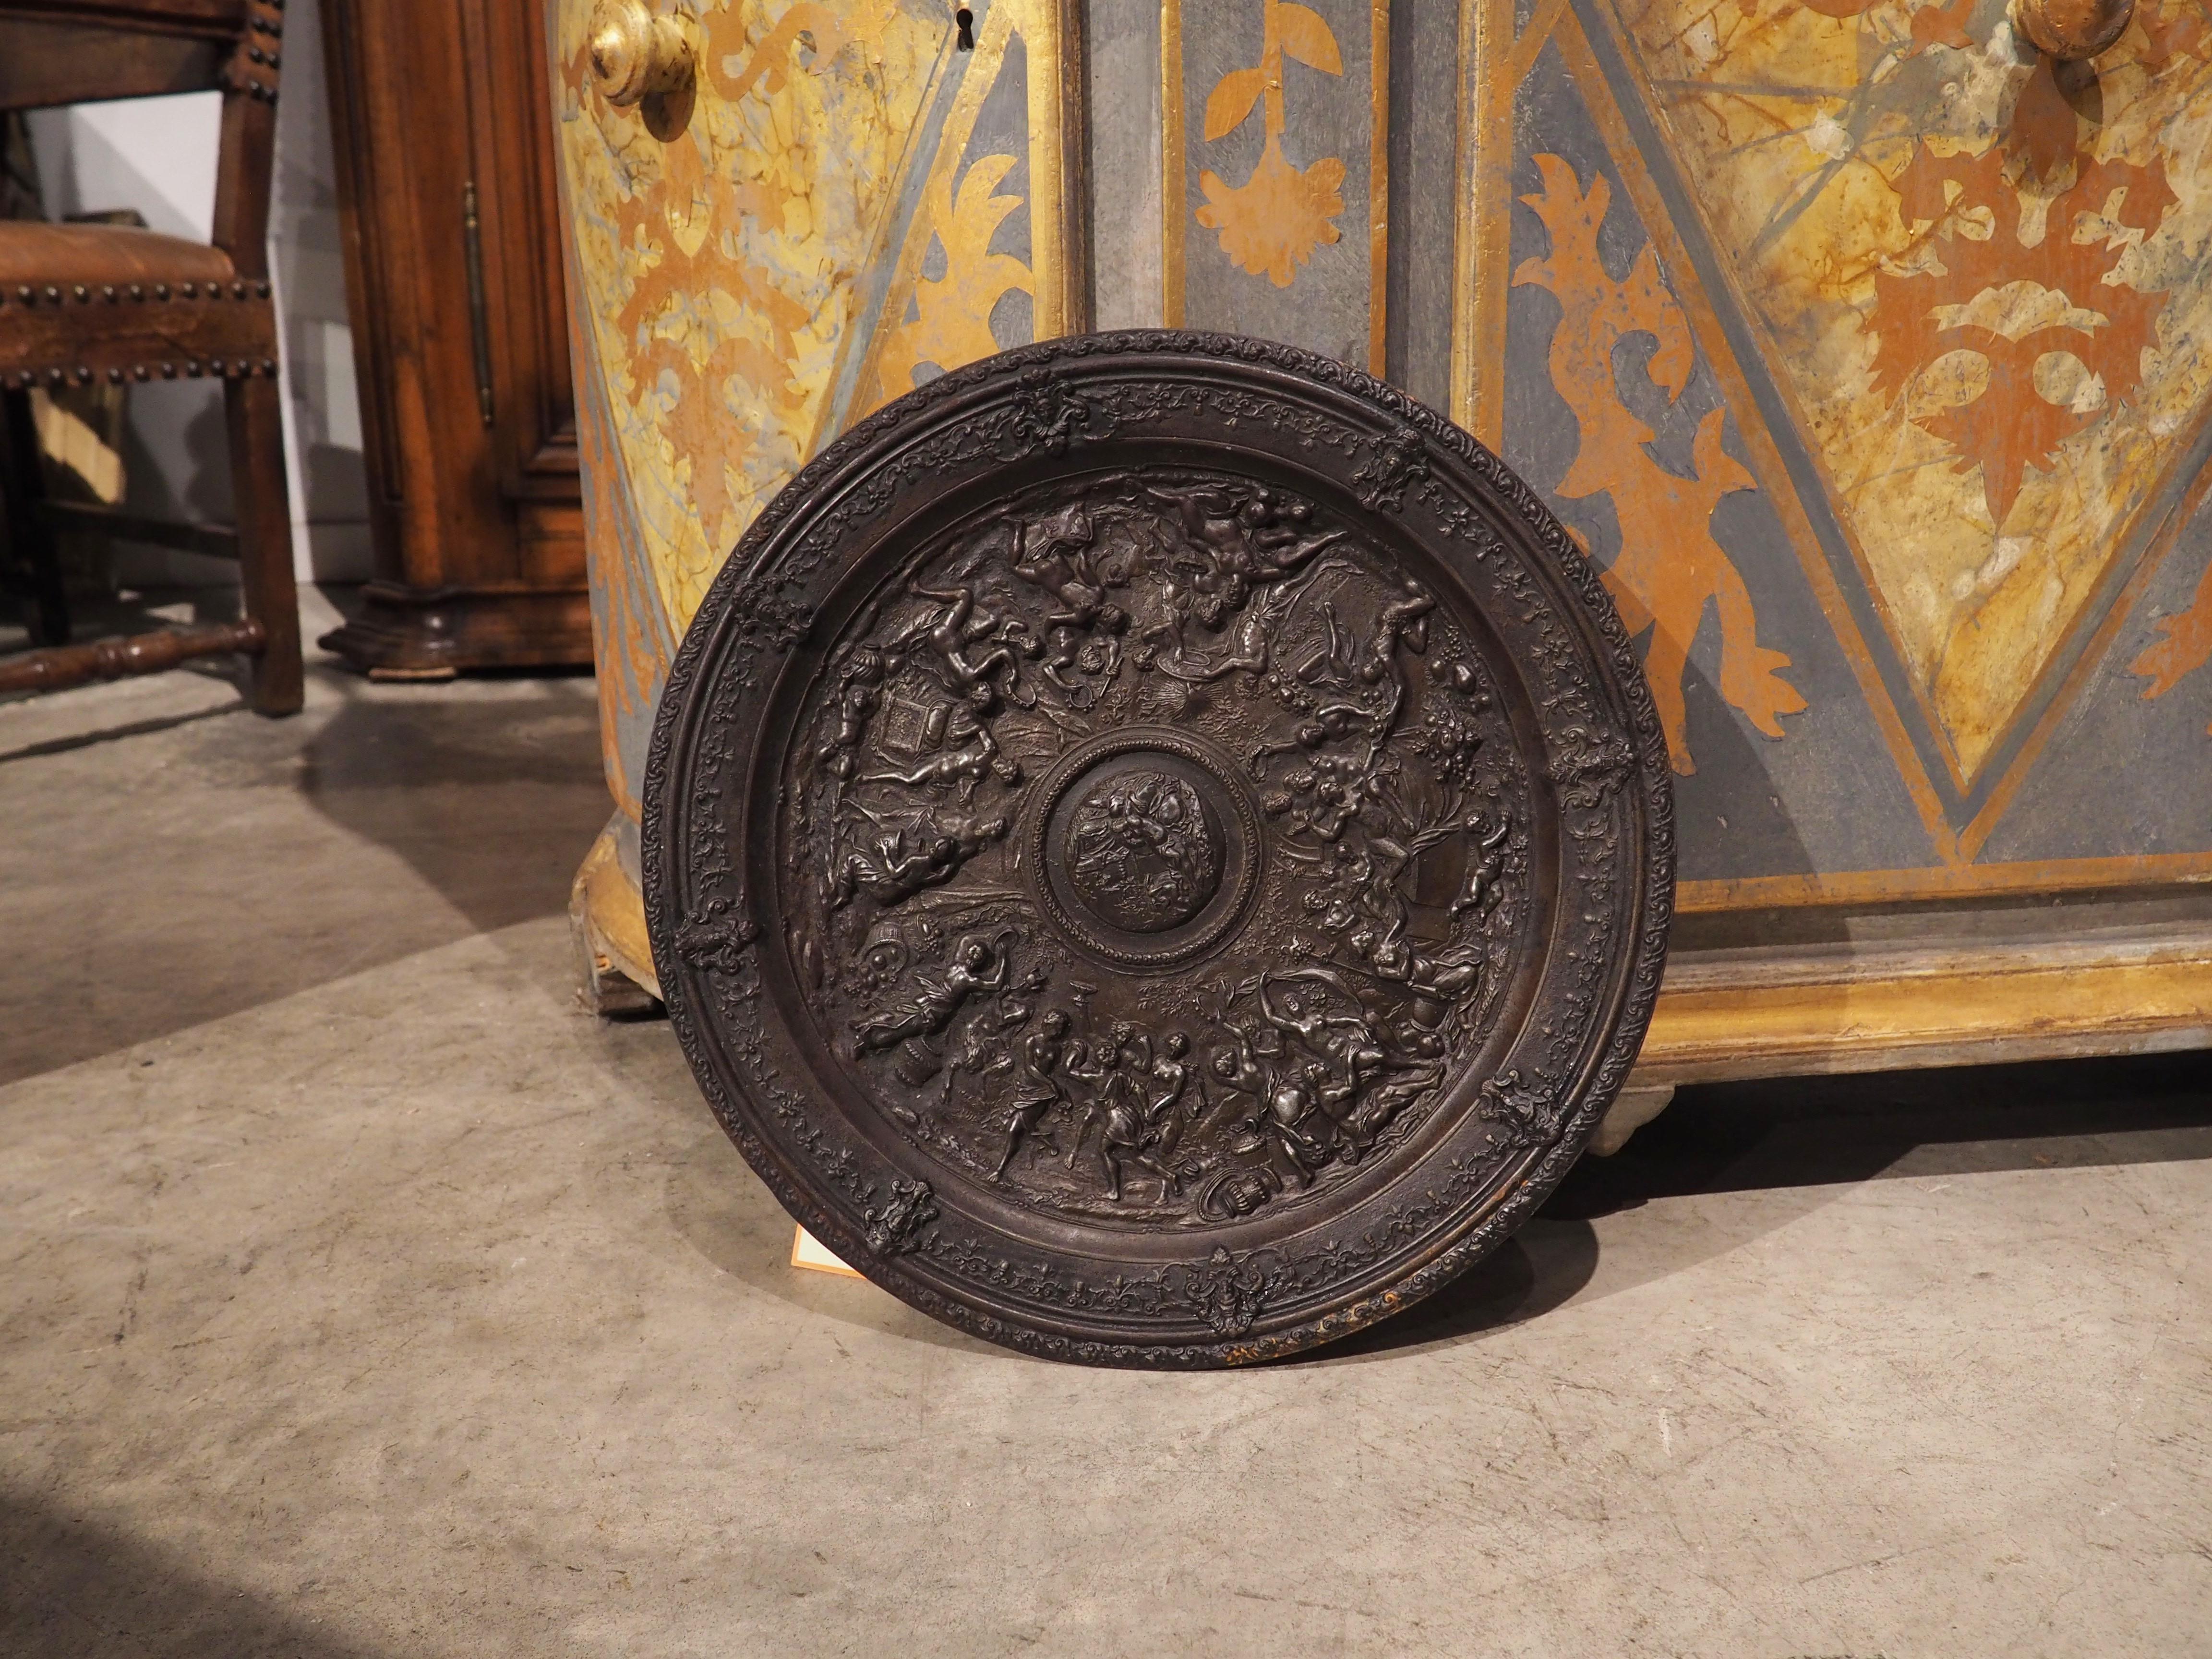 This cast iron charger from Germany was hand-worked in the 1800s. The low-relief image, in this case, a Bacchanalian scene, is full of hundreds of small decorative and figurative details.

The main body of the charger is recessed below the outer